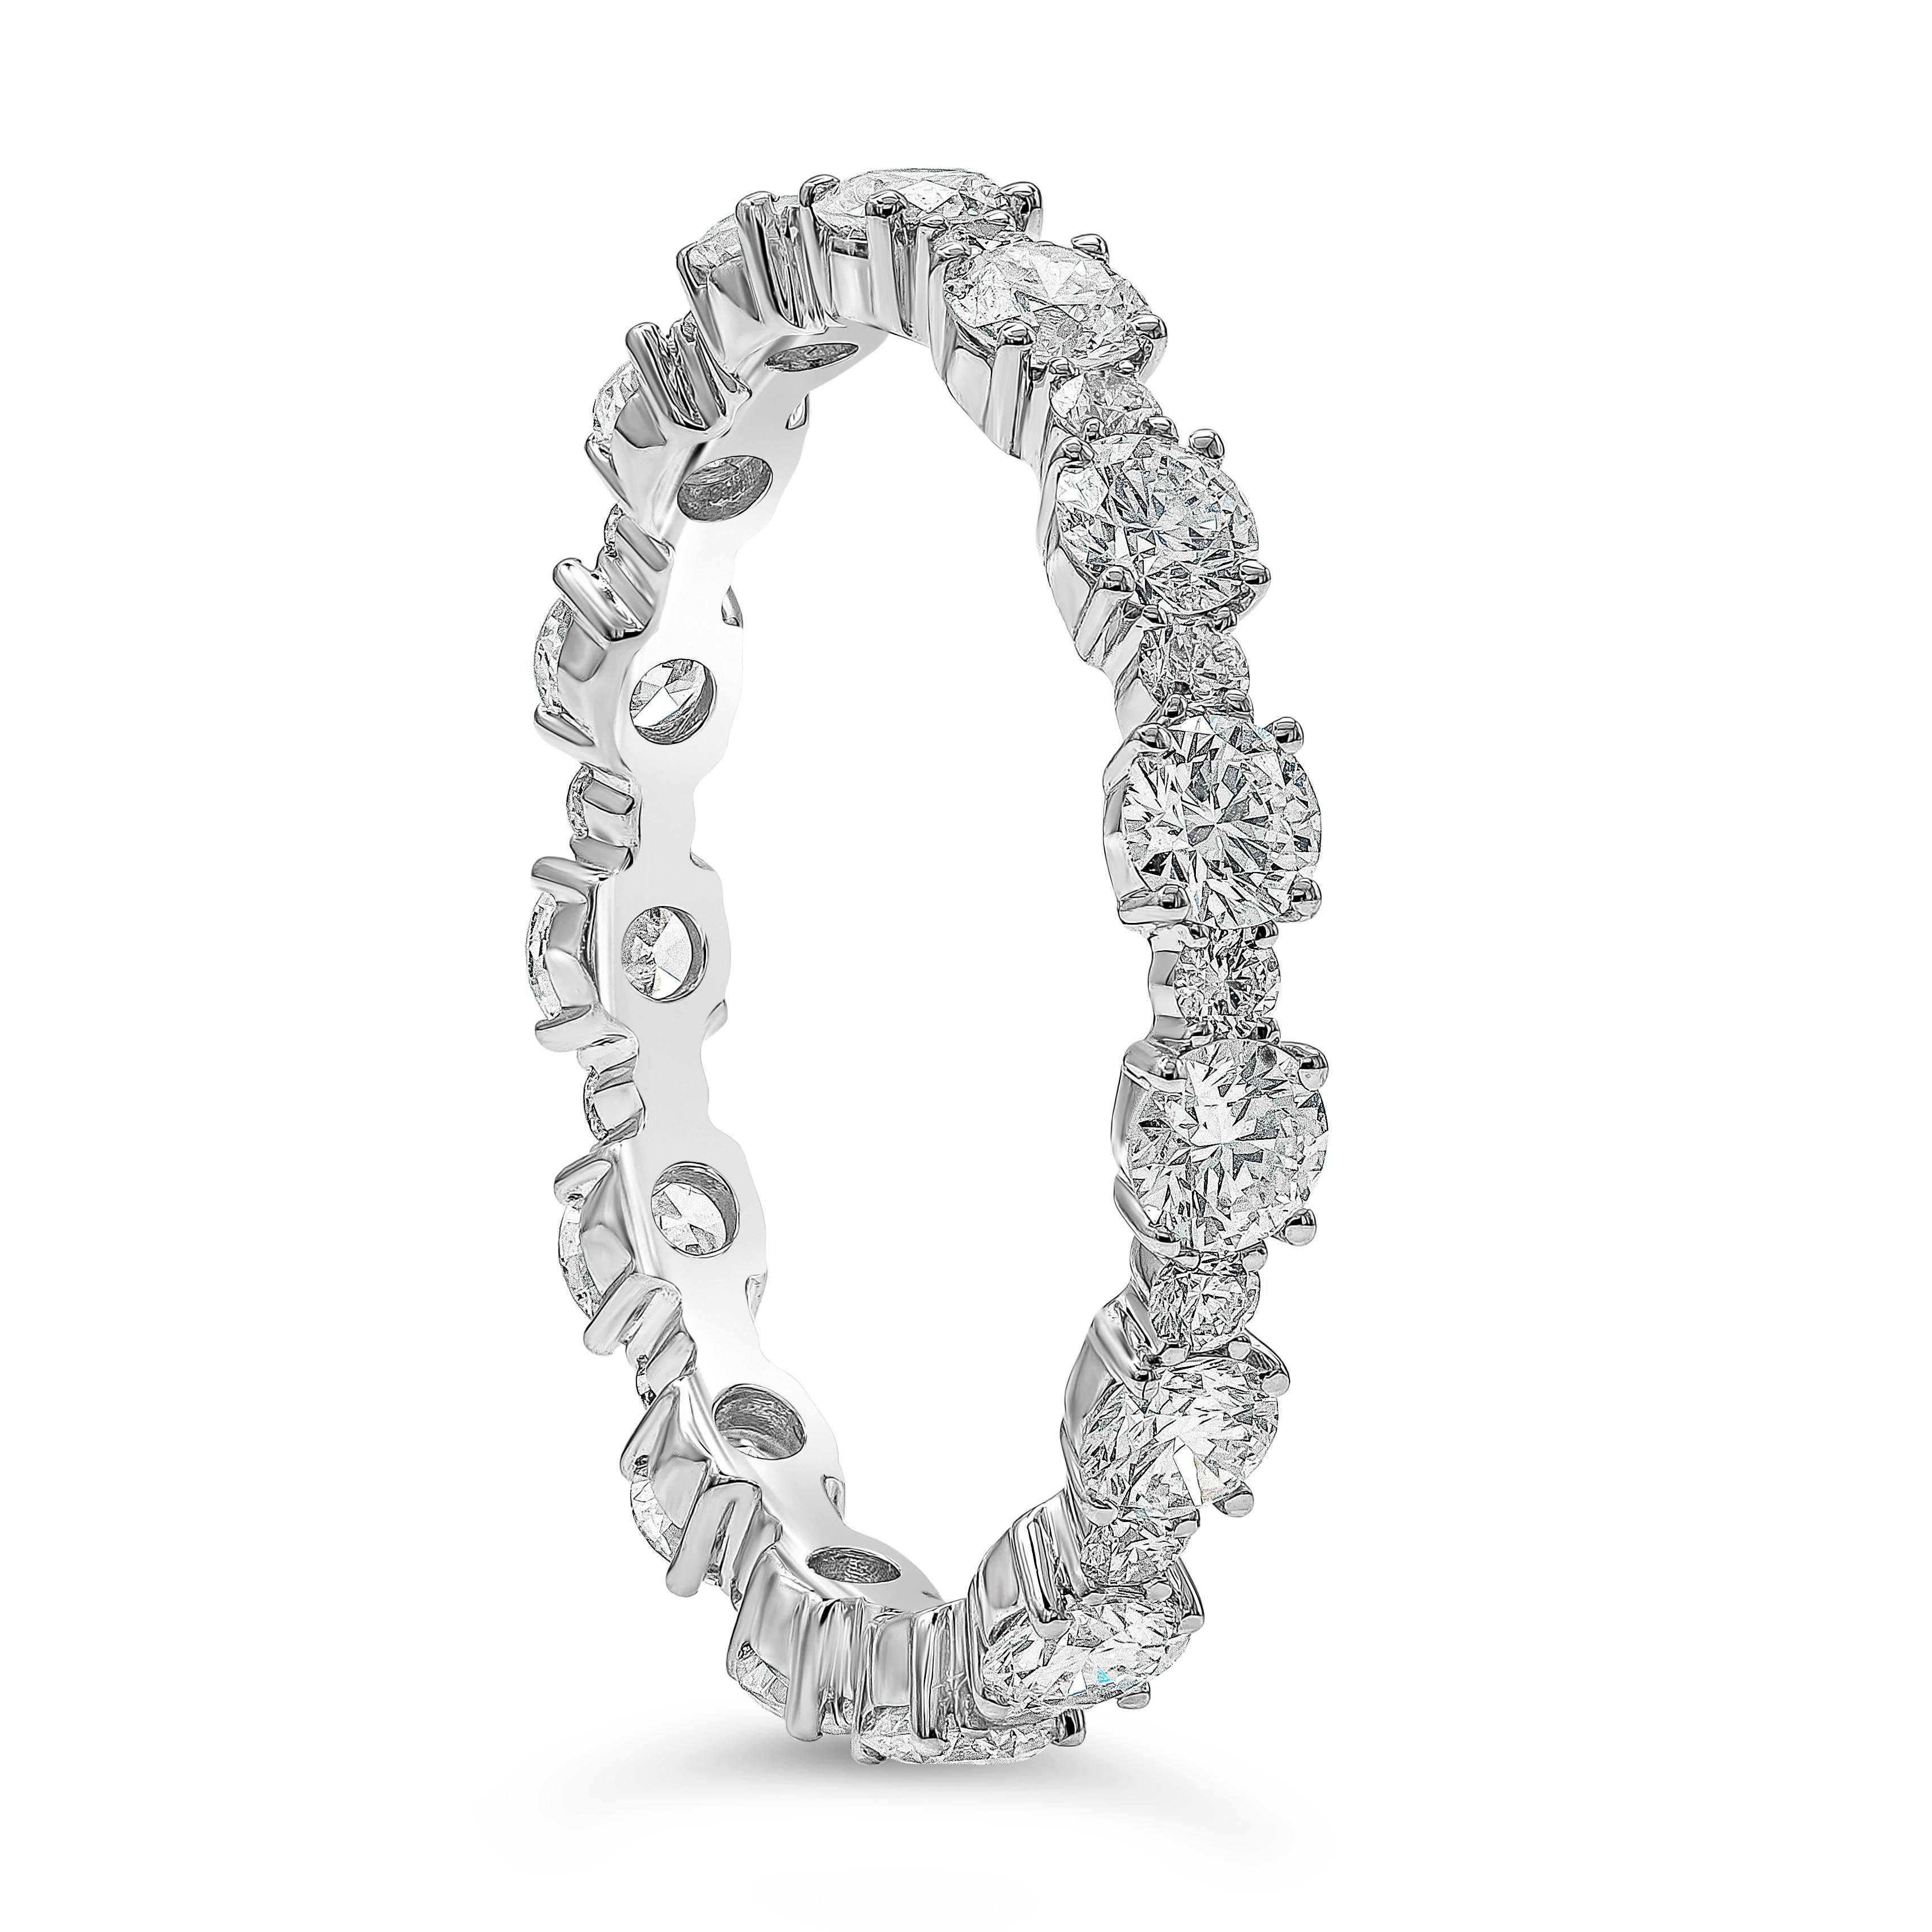 A uniquely-designed eternity wedding band showcasing a row of round brilliant diamonds elegantly spaced by smaller round melee diamonds weigh 1.49 carats total, G Color and VS-SI in Clarity. Made in 18K White Gold, Size 6.5 US resizable upon